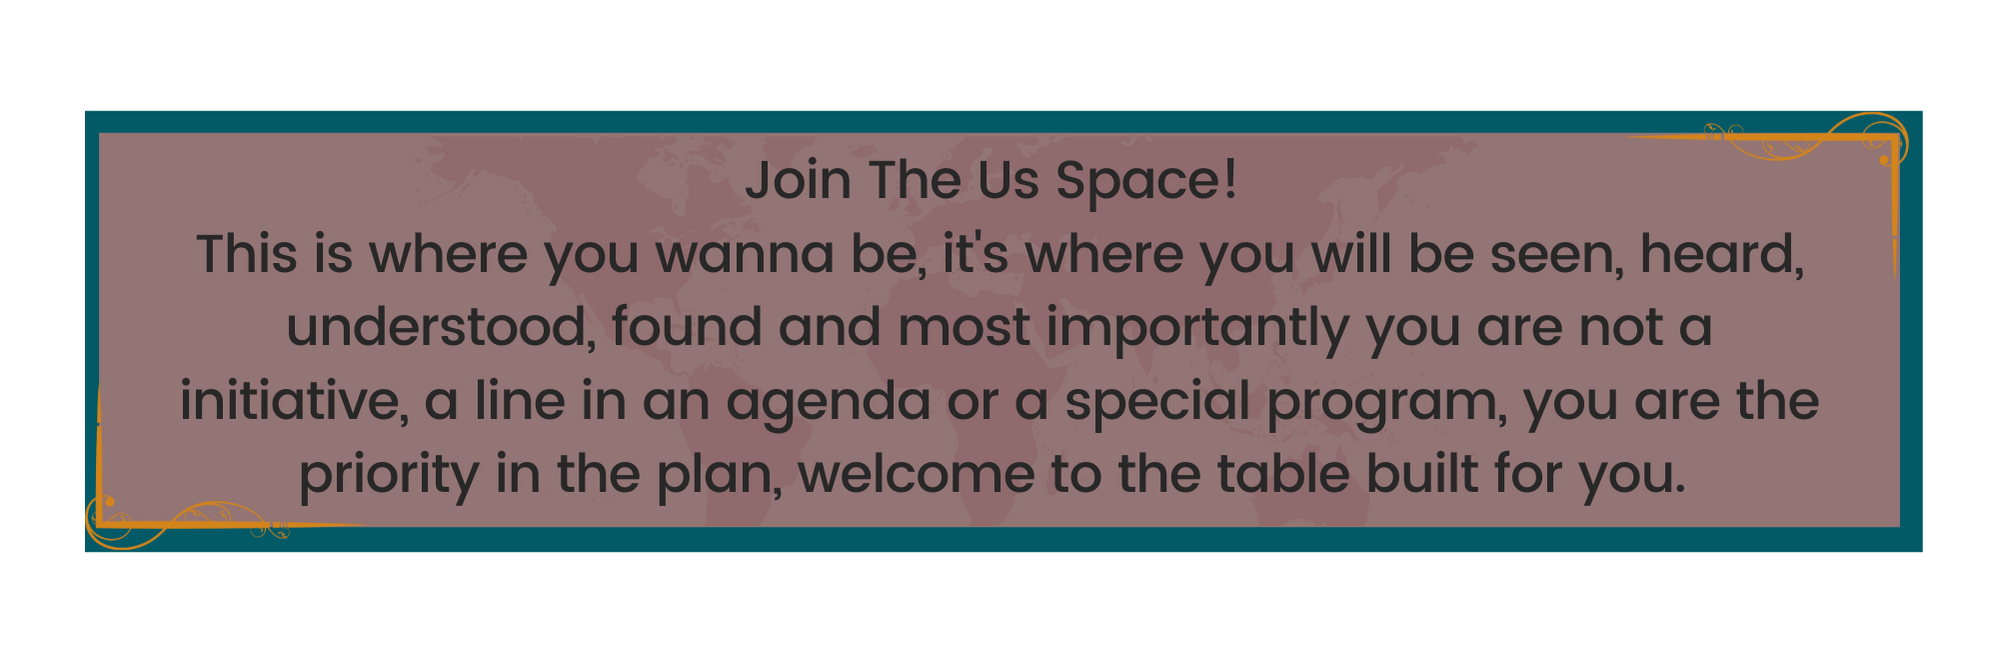 The Us Space - Welcome to The Table